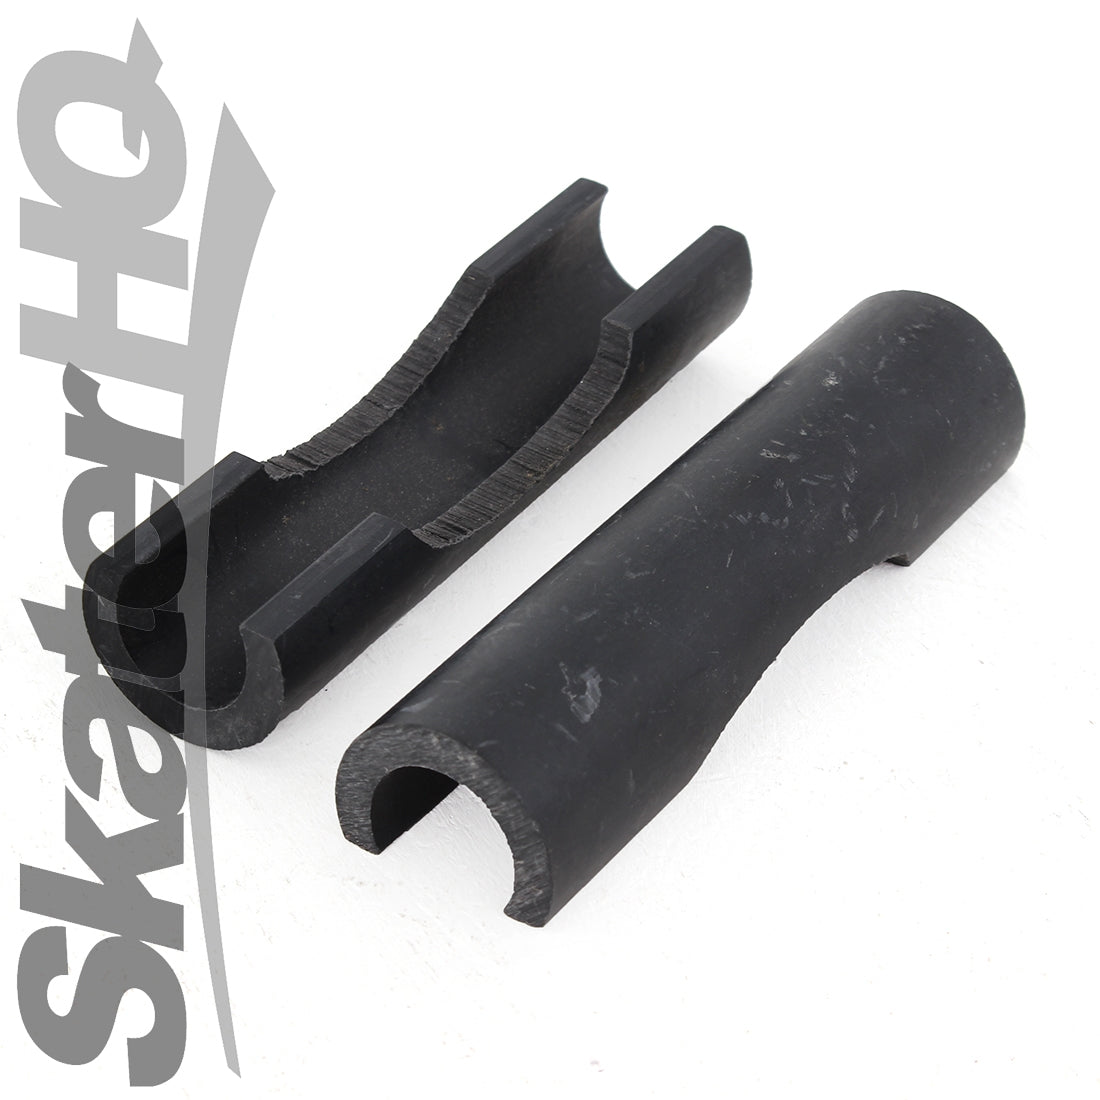 Trinity Truck Copers Round PAIR - Black Skateboard Hardware and Parts